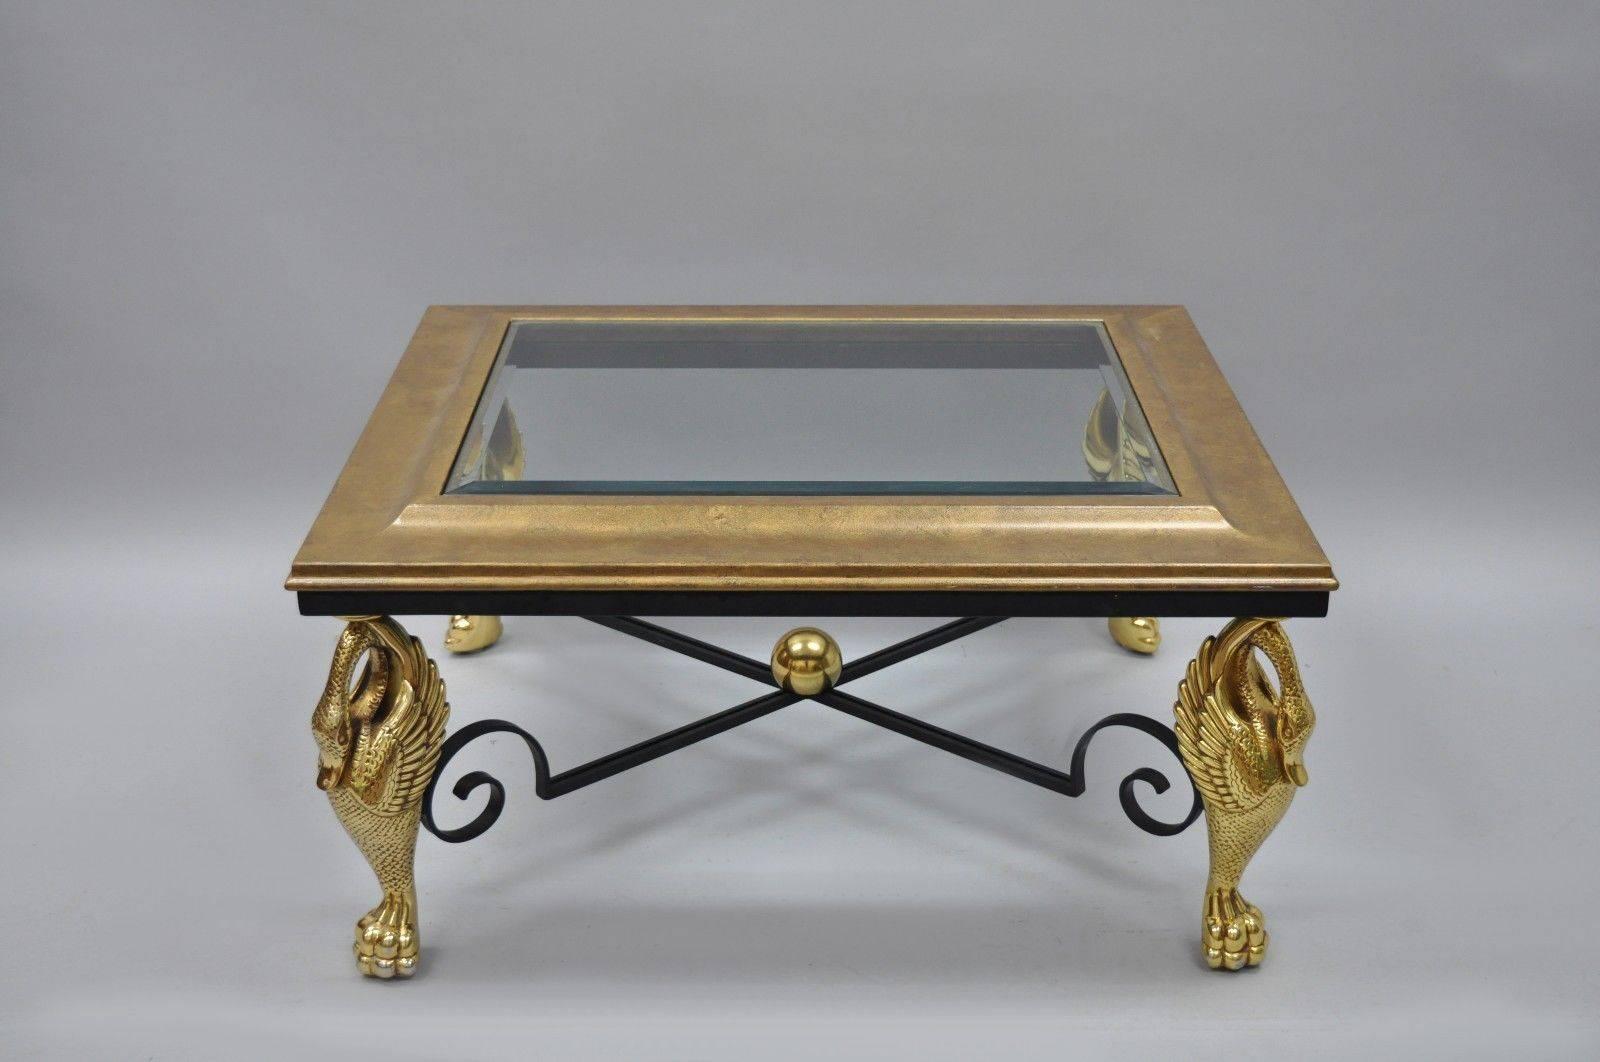 Regency Style Swan Base Rectangular Coffee Table Gold Metal Iron and Glass Top For Sale 2